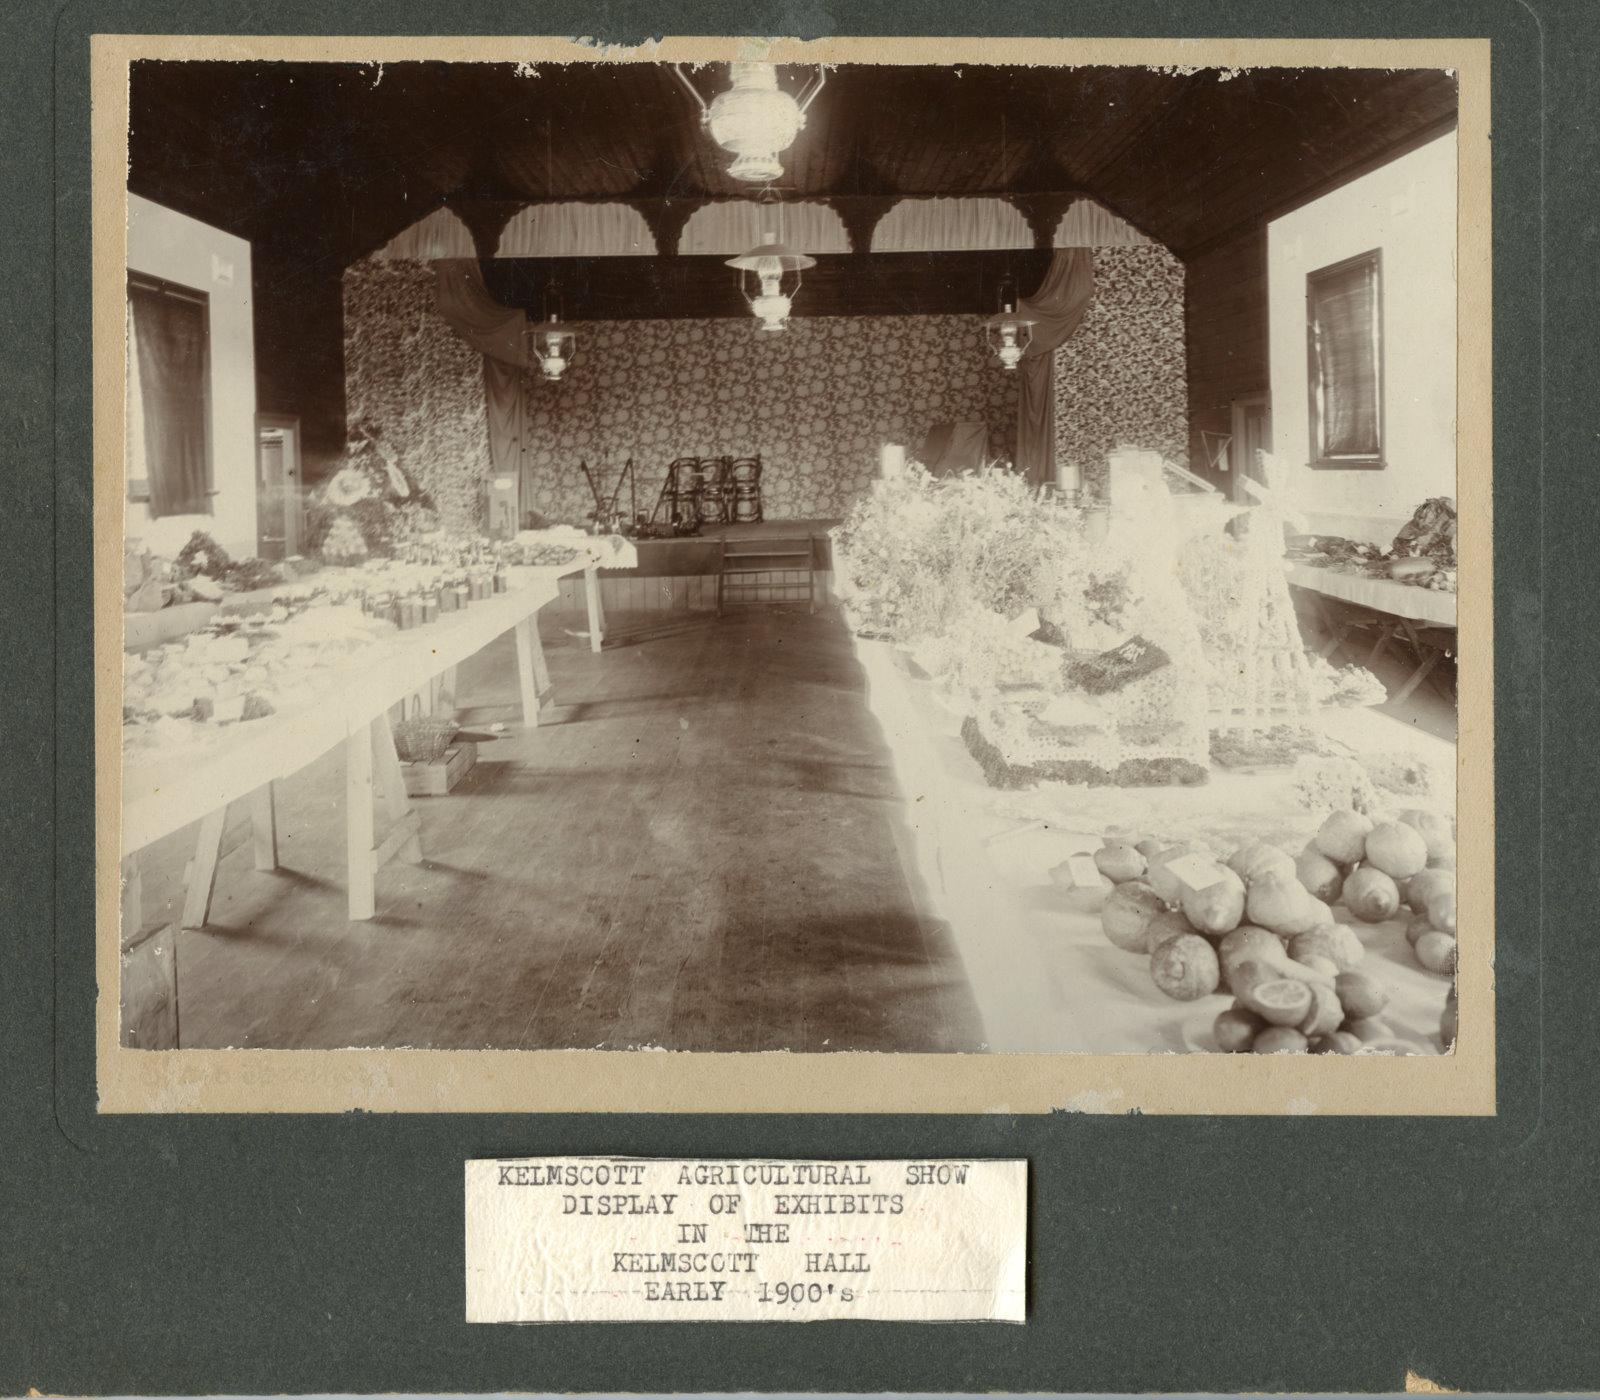 Display of exhibits in the early 1900s